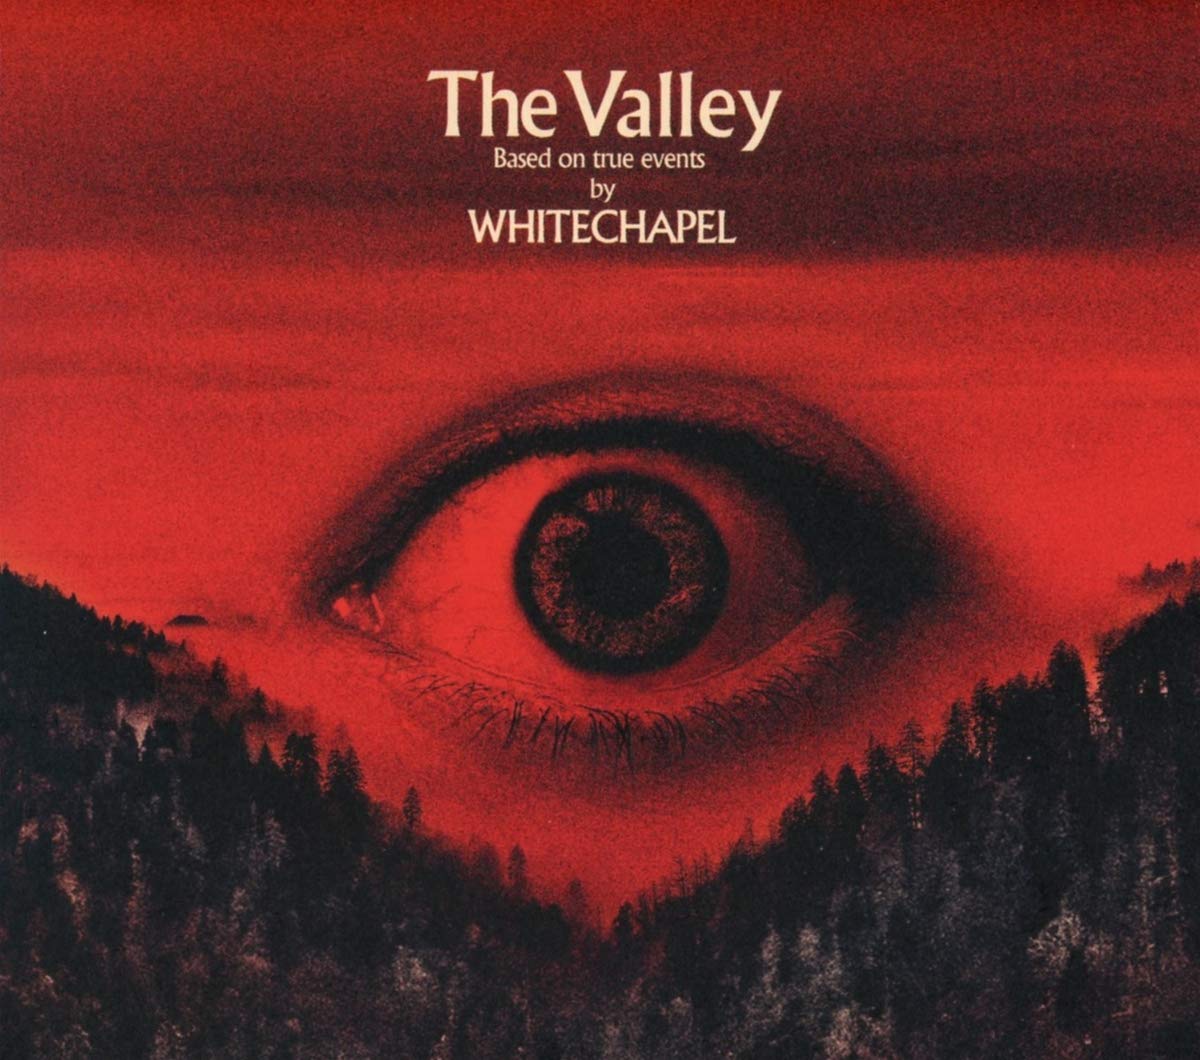 Whitechapel streaming ‘The Valley’ ahead of release date